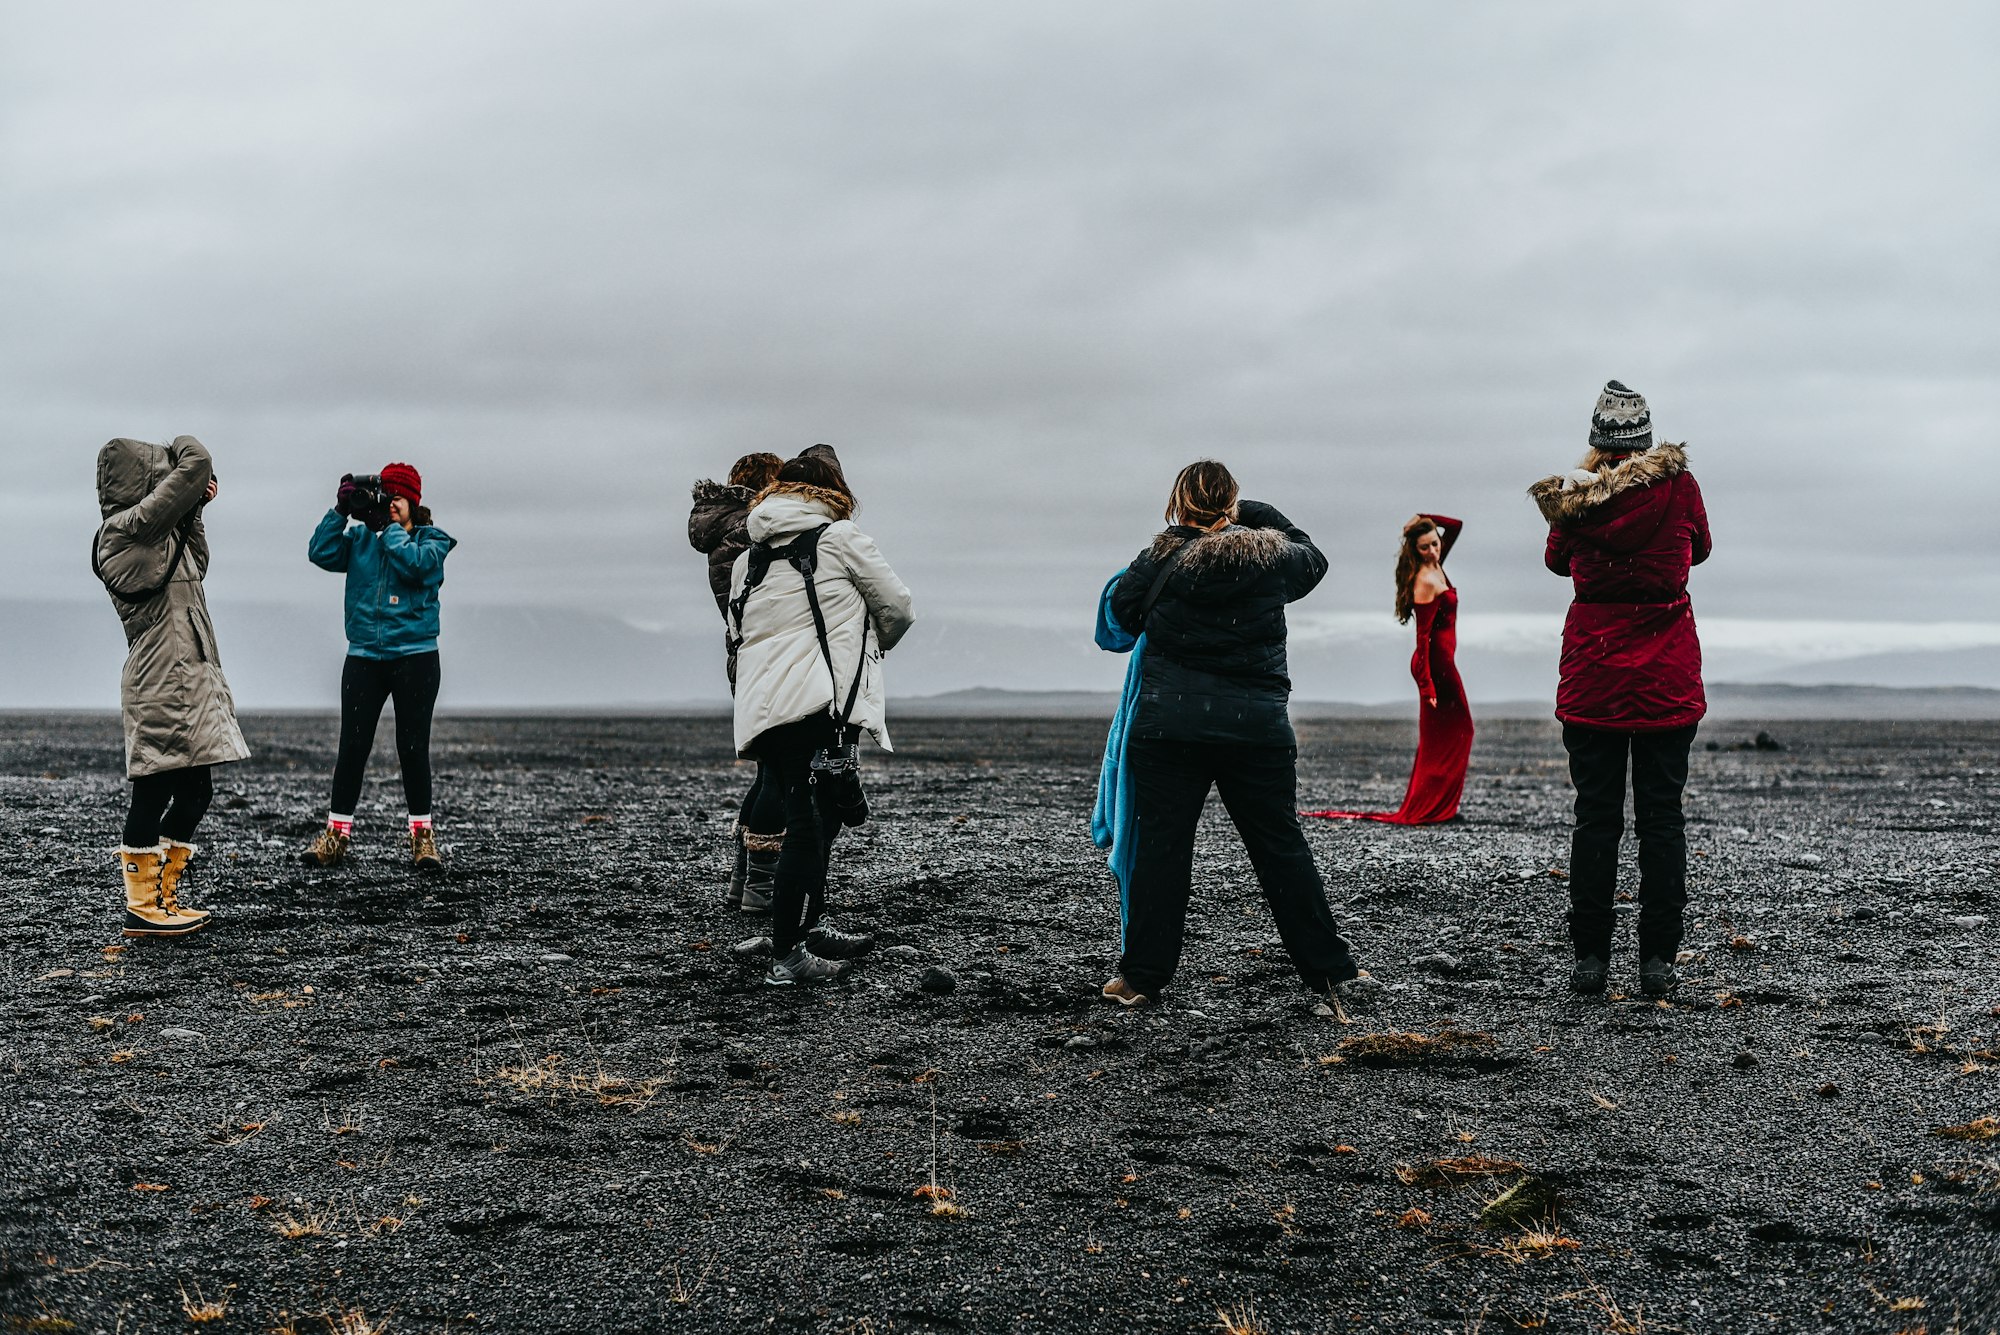 A group of photographers photographing a model in Iceland